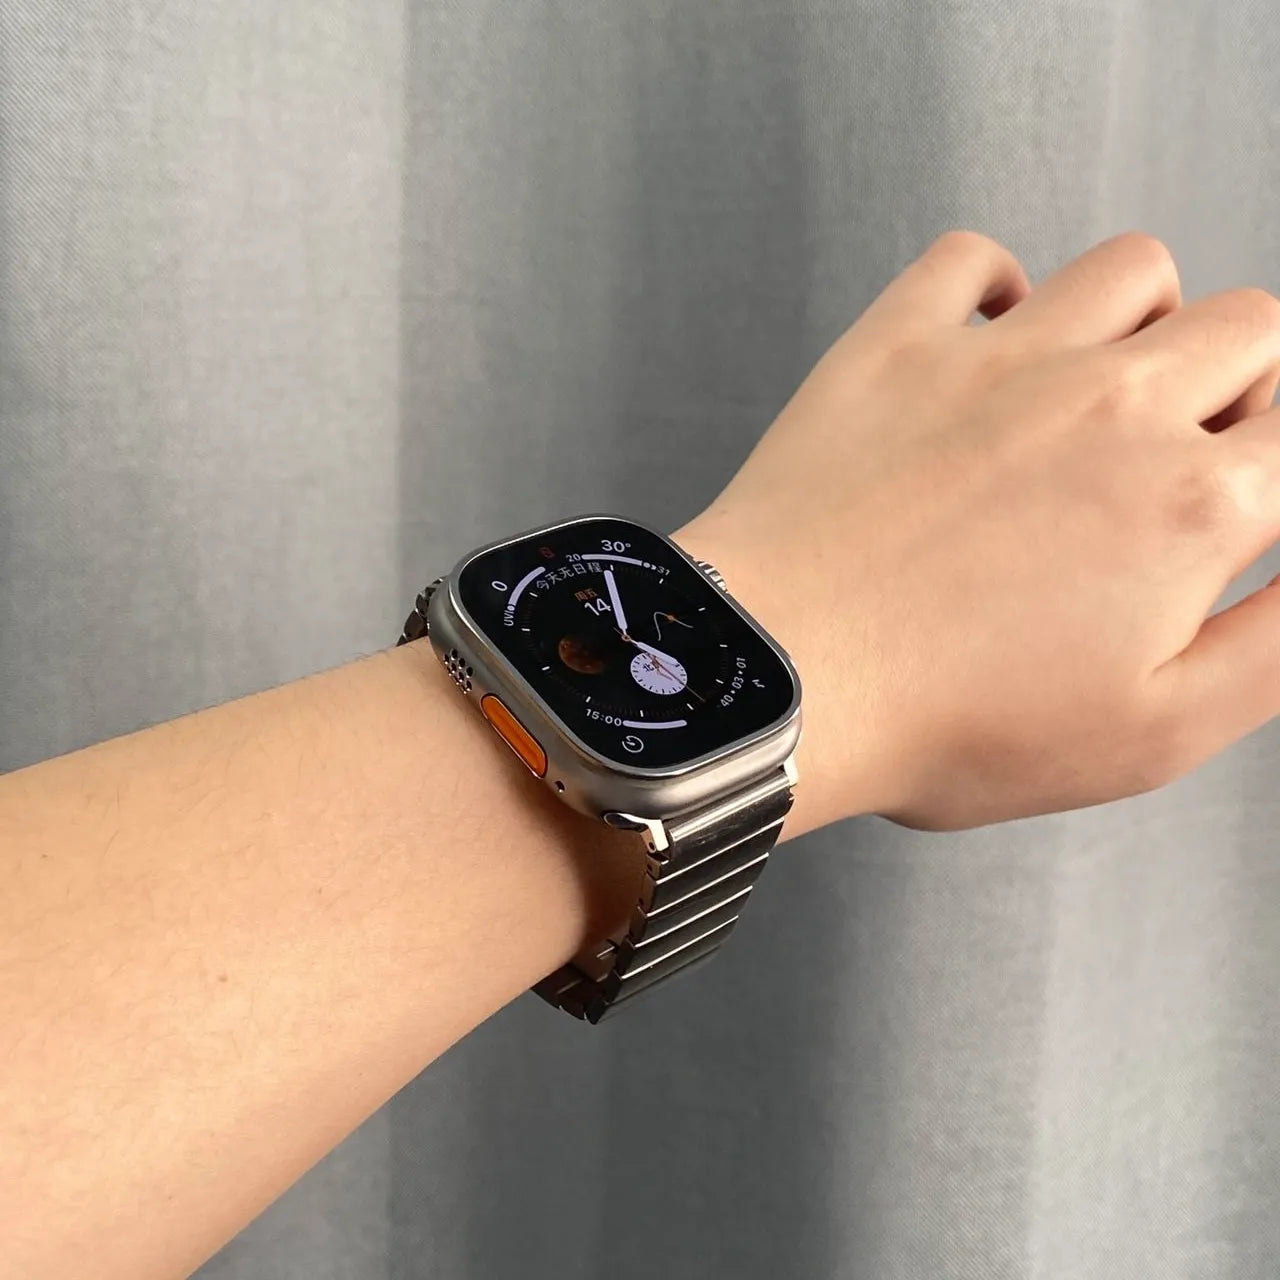 A Week On The Wrist: The Apple Watch Series 5 Edition In Titanium